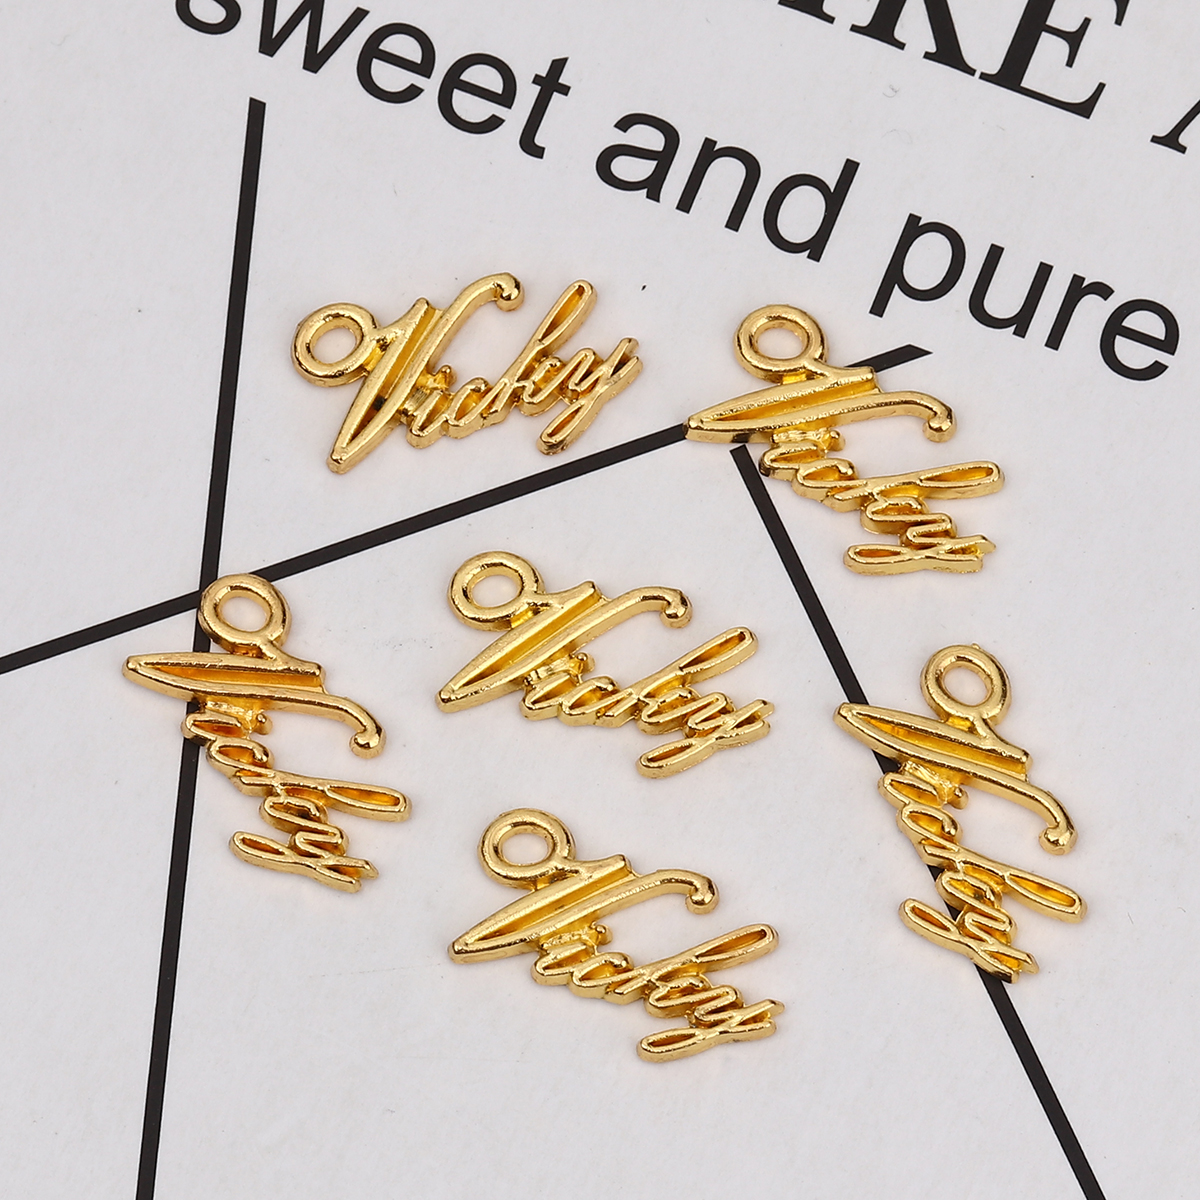 Picture of Zinc Based Alloy Resin Jewelry Tools Gold Plated Message " Vicky " 21mm( 7/8") x 11mm( 3/8"), 10 PCs